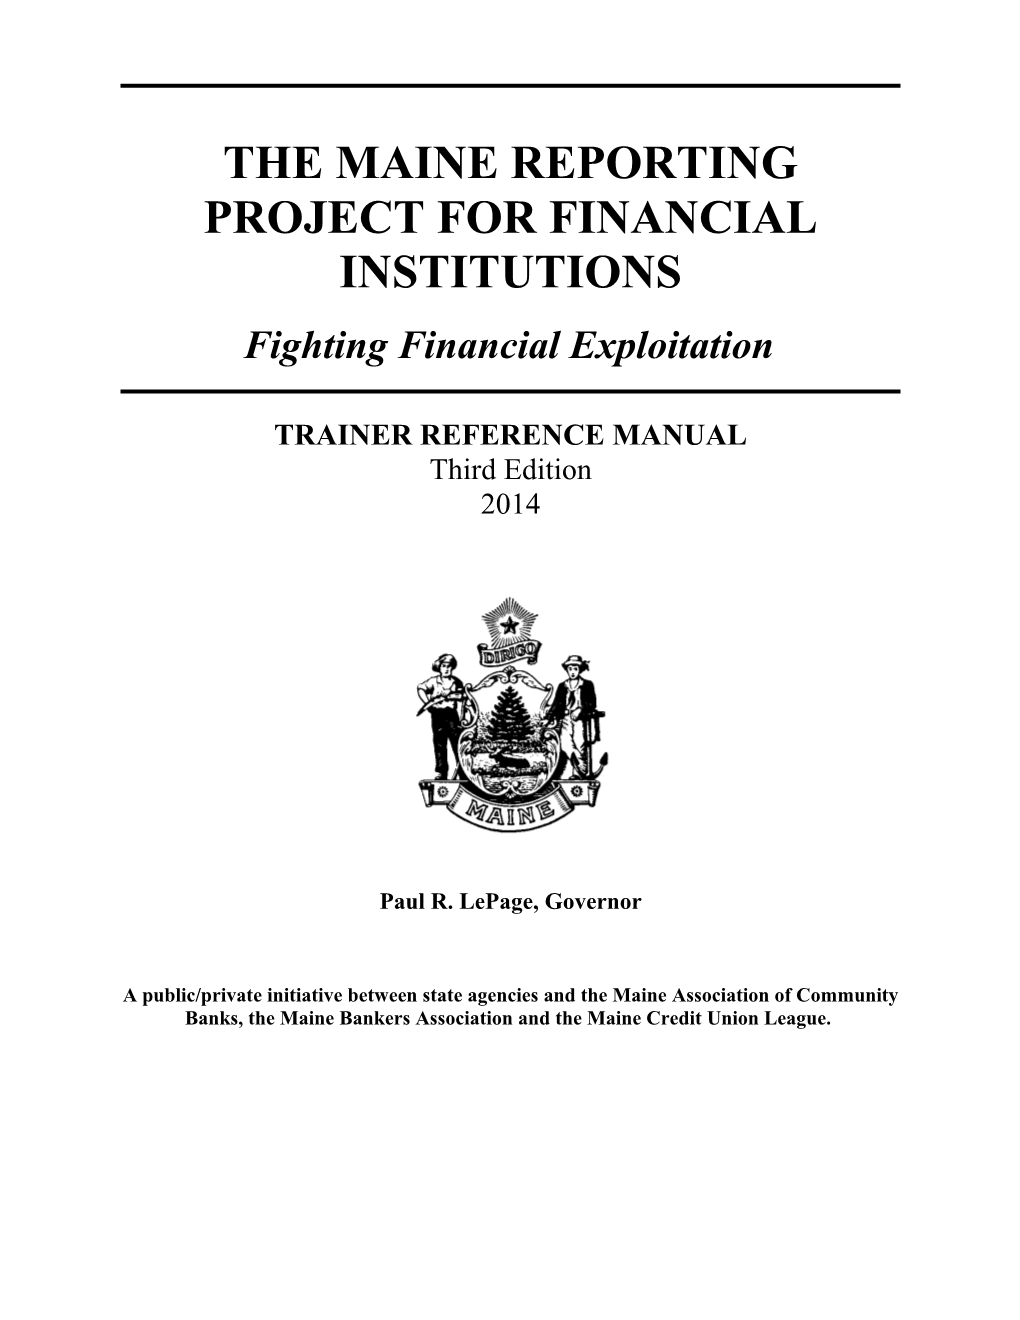 The Maine Reporting Project for Financial Institutions